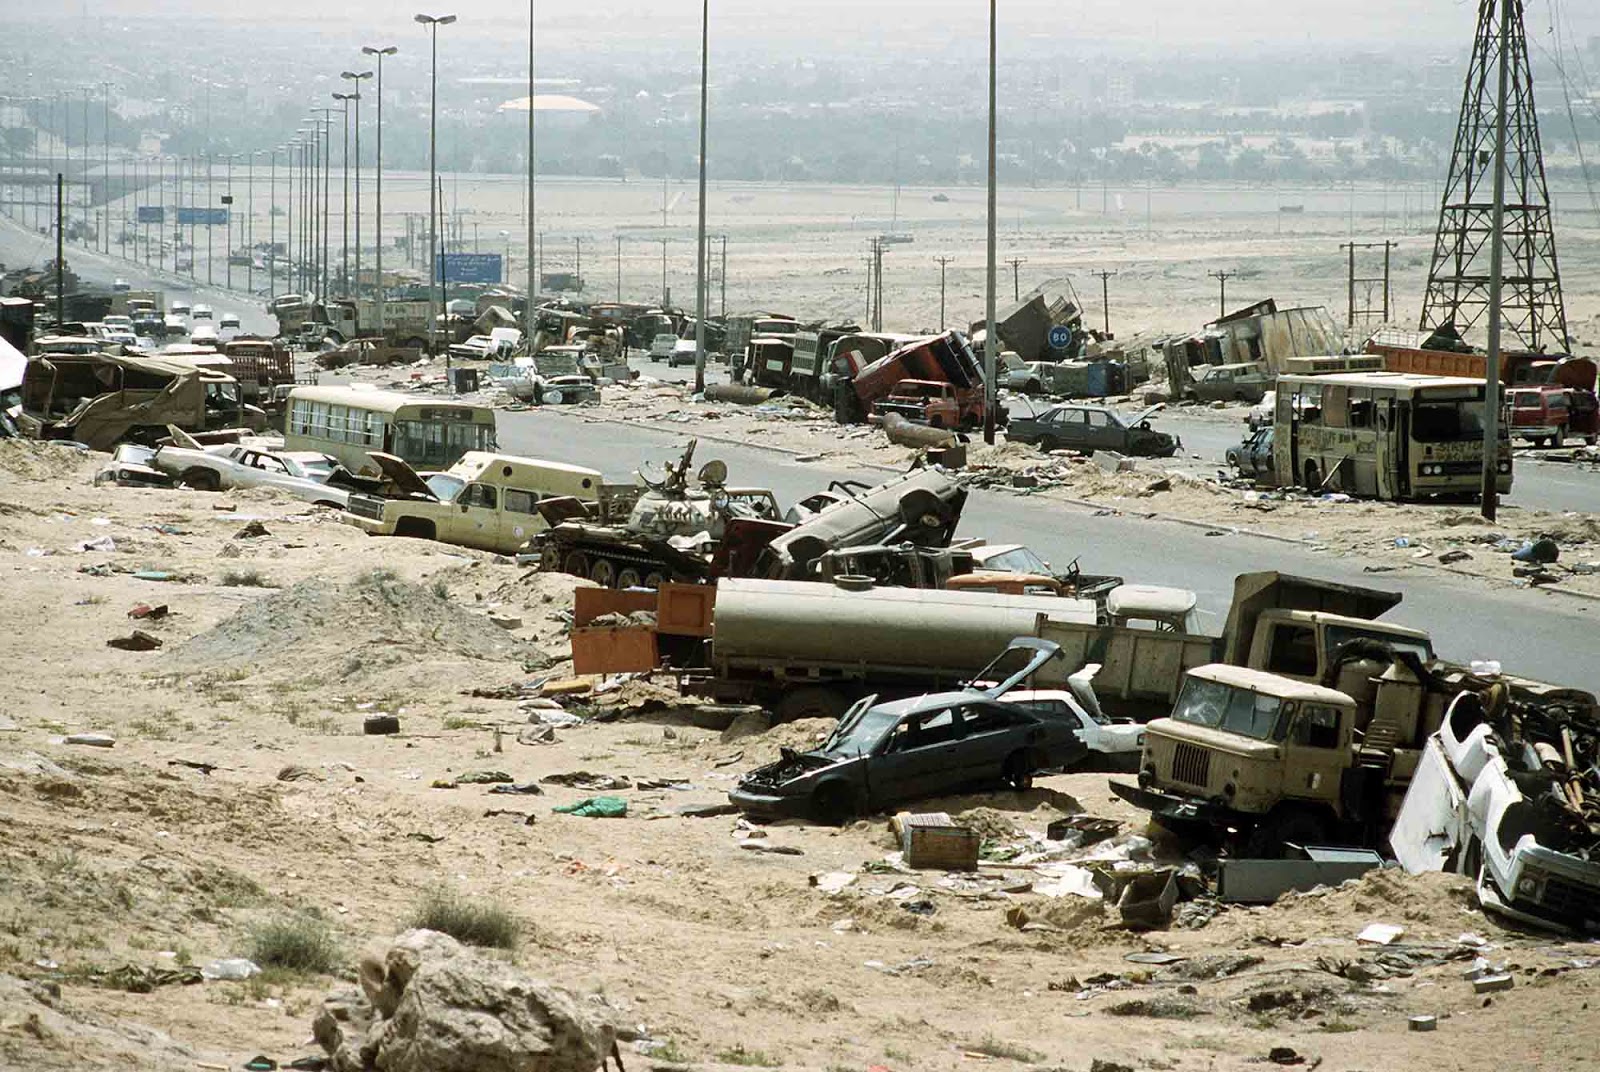 Most of the vehicles were abandoned by the time they were struck. While high casualty counts are upwards of 10,000 for the entire battle, low end estimates are only around 200-300.